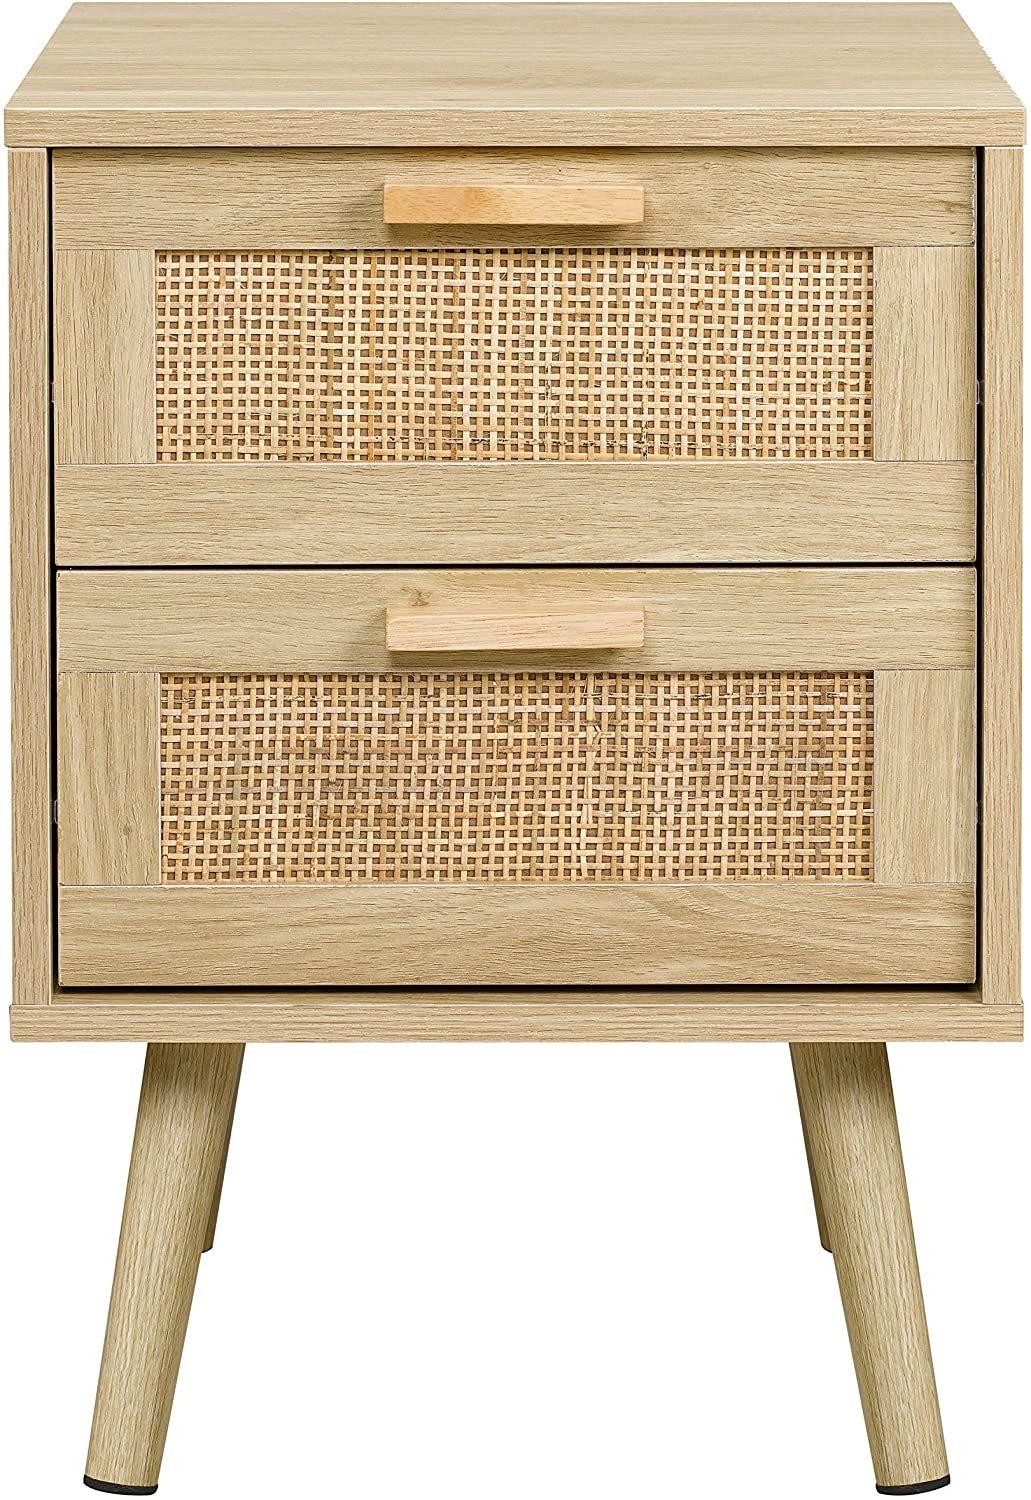 Most Popular Rattan Bedside Table End Table Nightstand for Living Room Bedroom